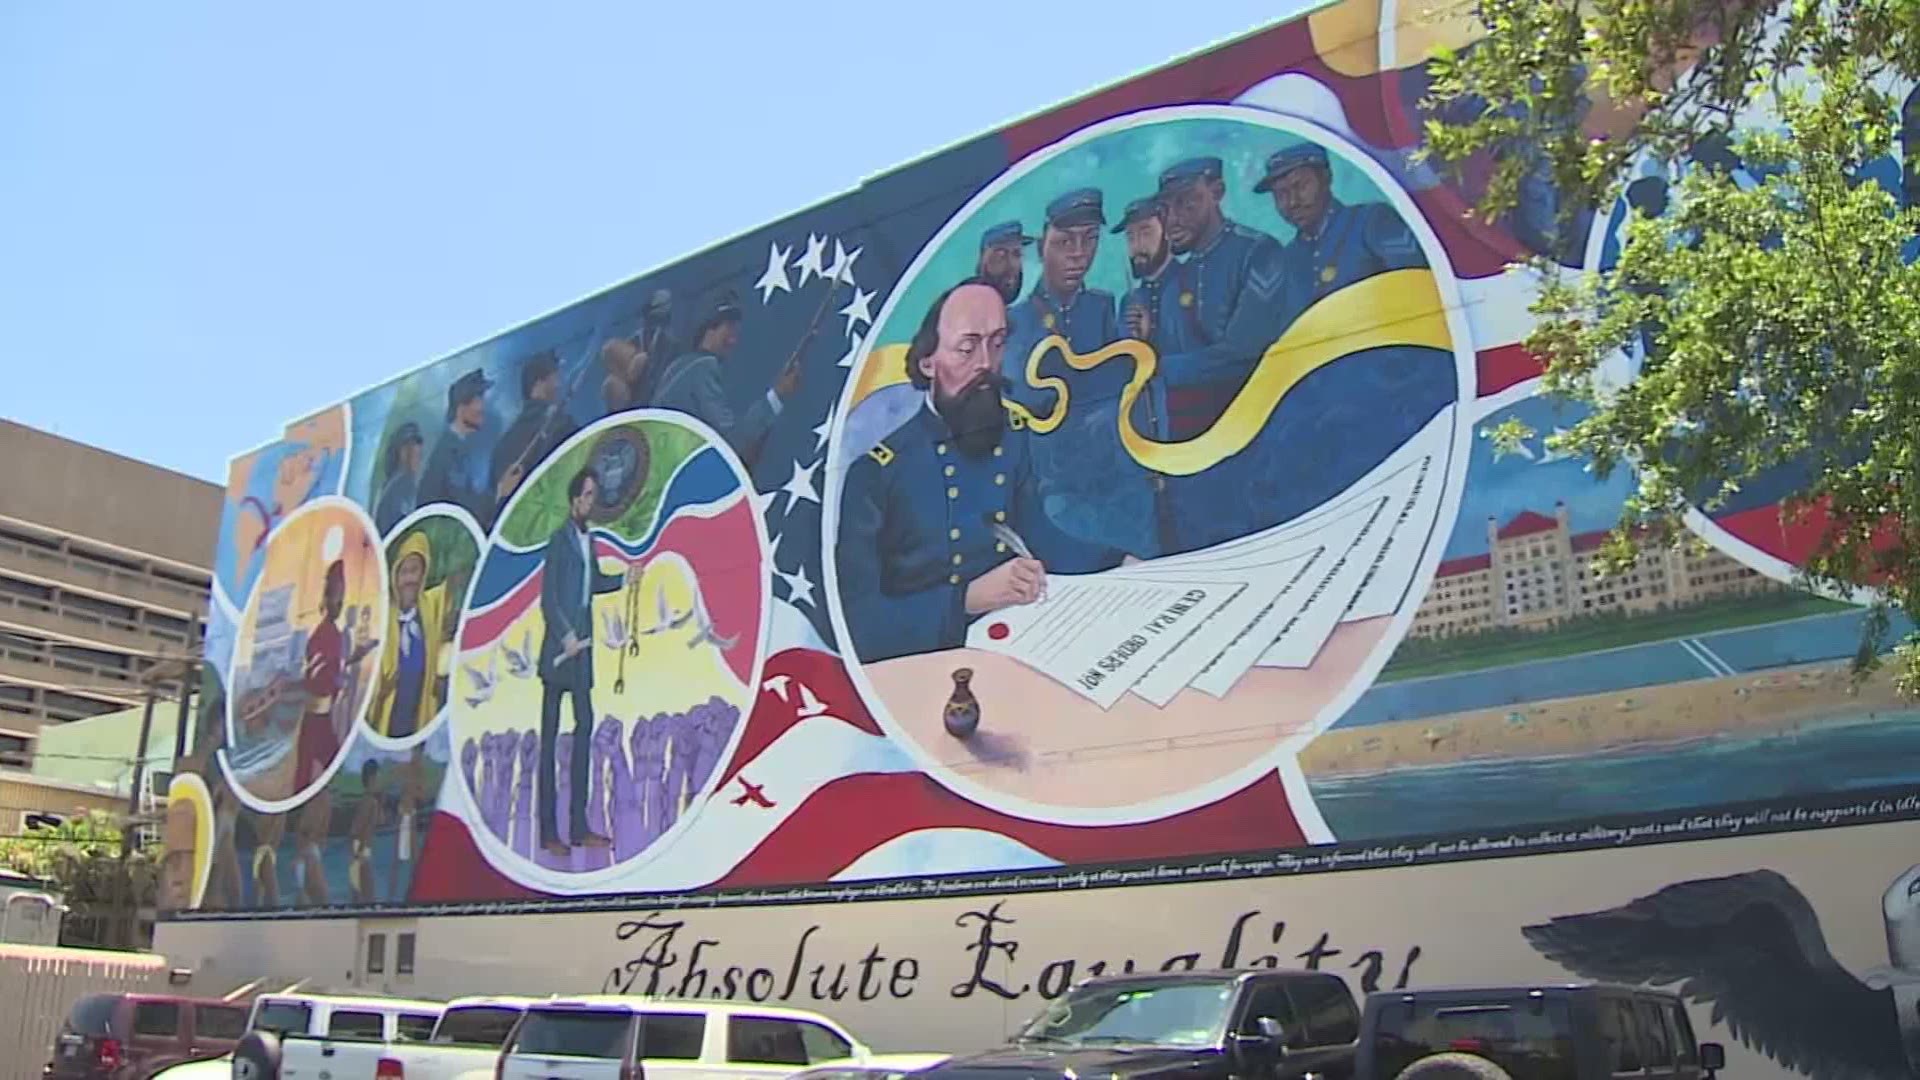 Houston artist Reginald C. Adams and his crew hope the mural inspires people from around the world.